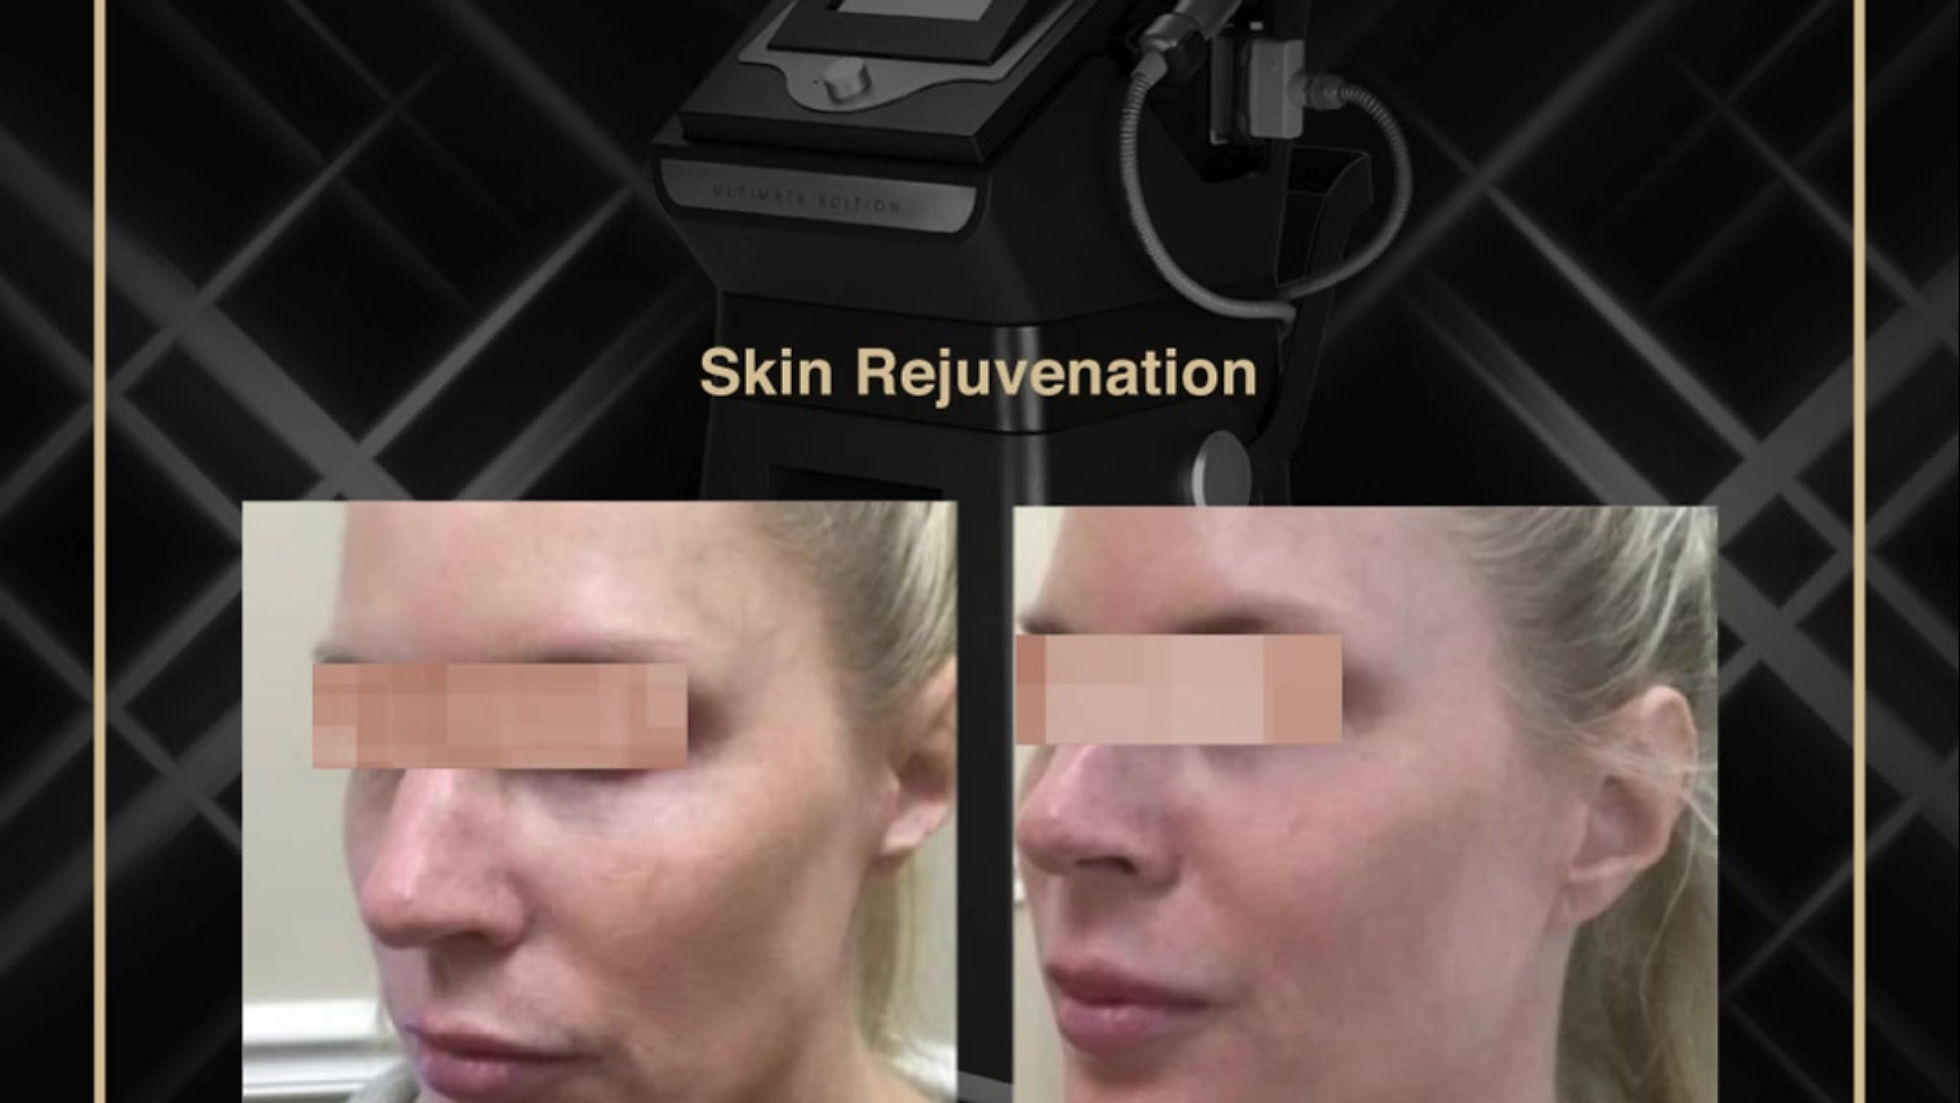 Sylfirm X : Skin Rejuvenation Before and After